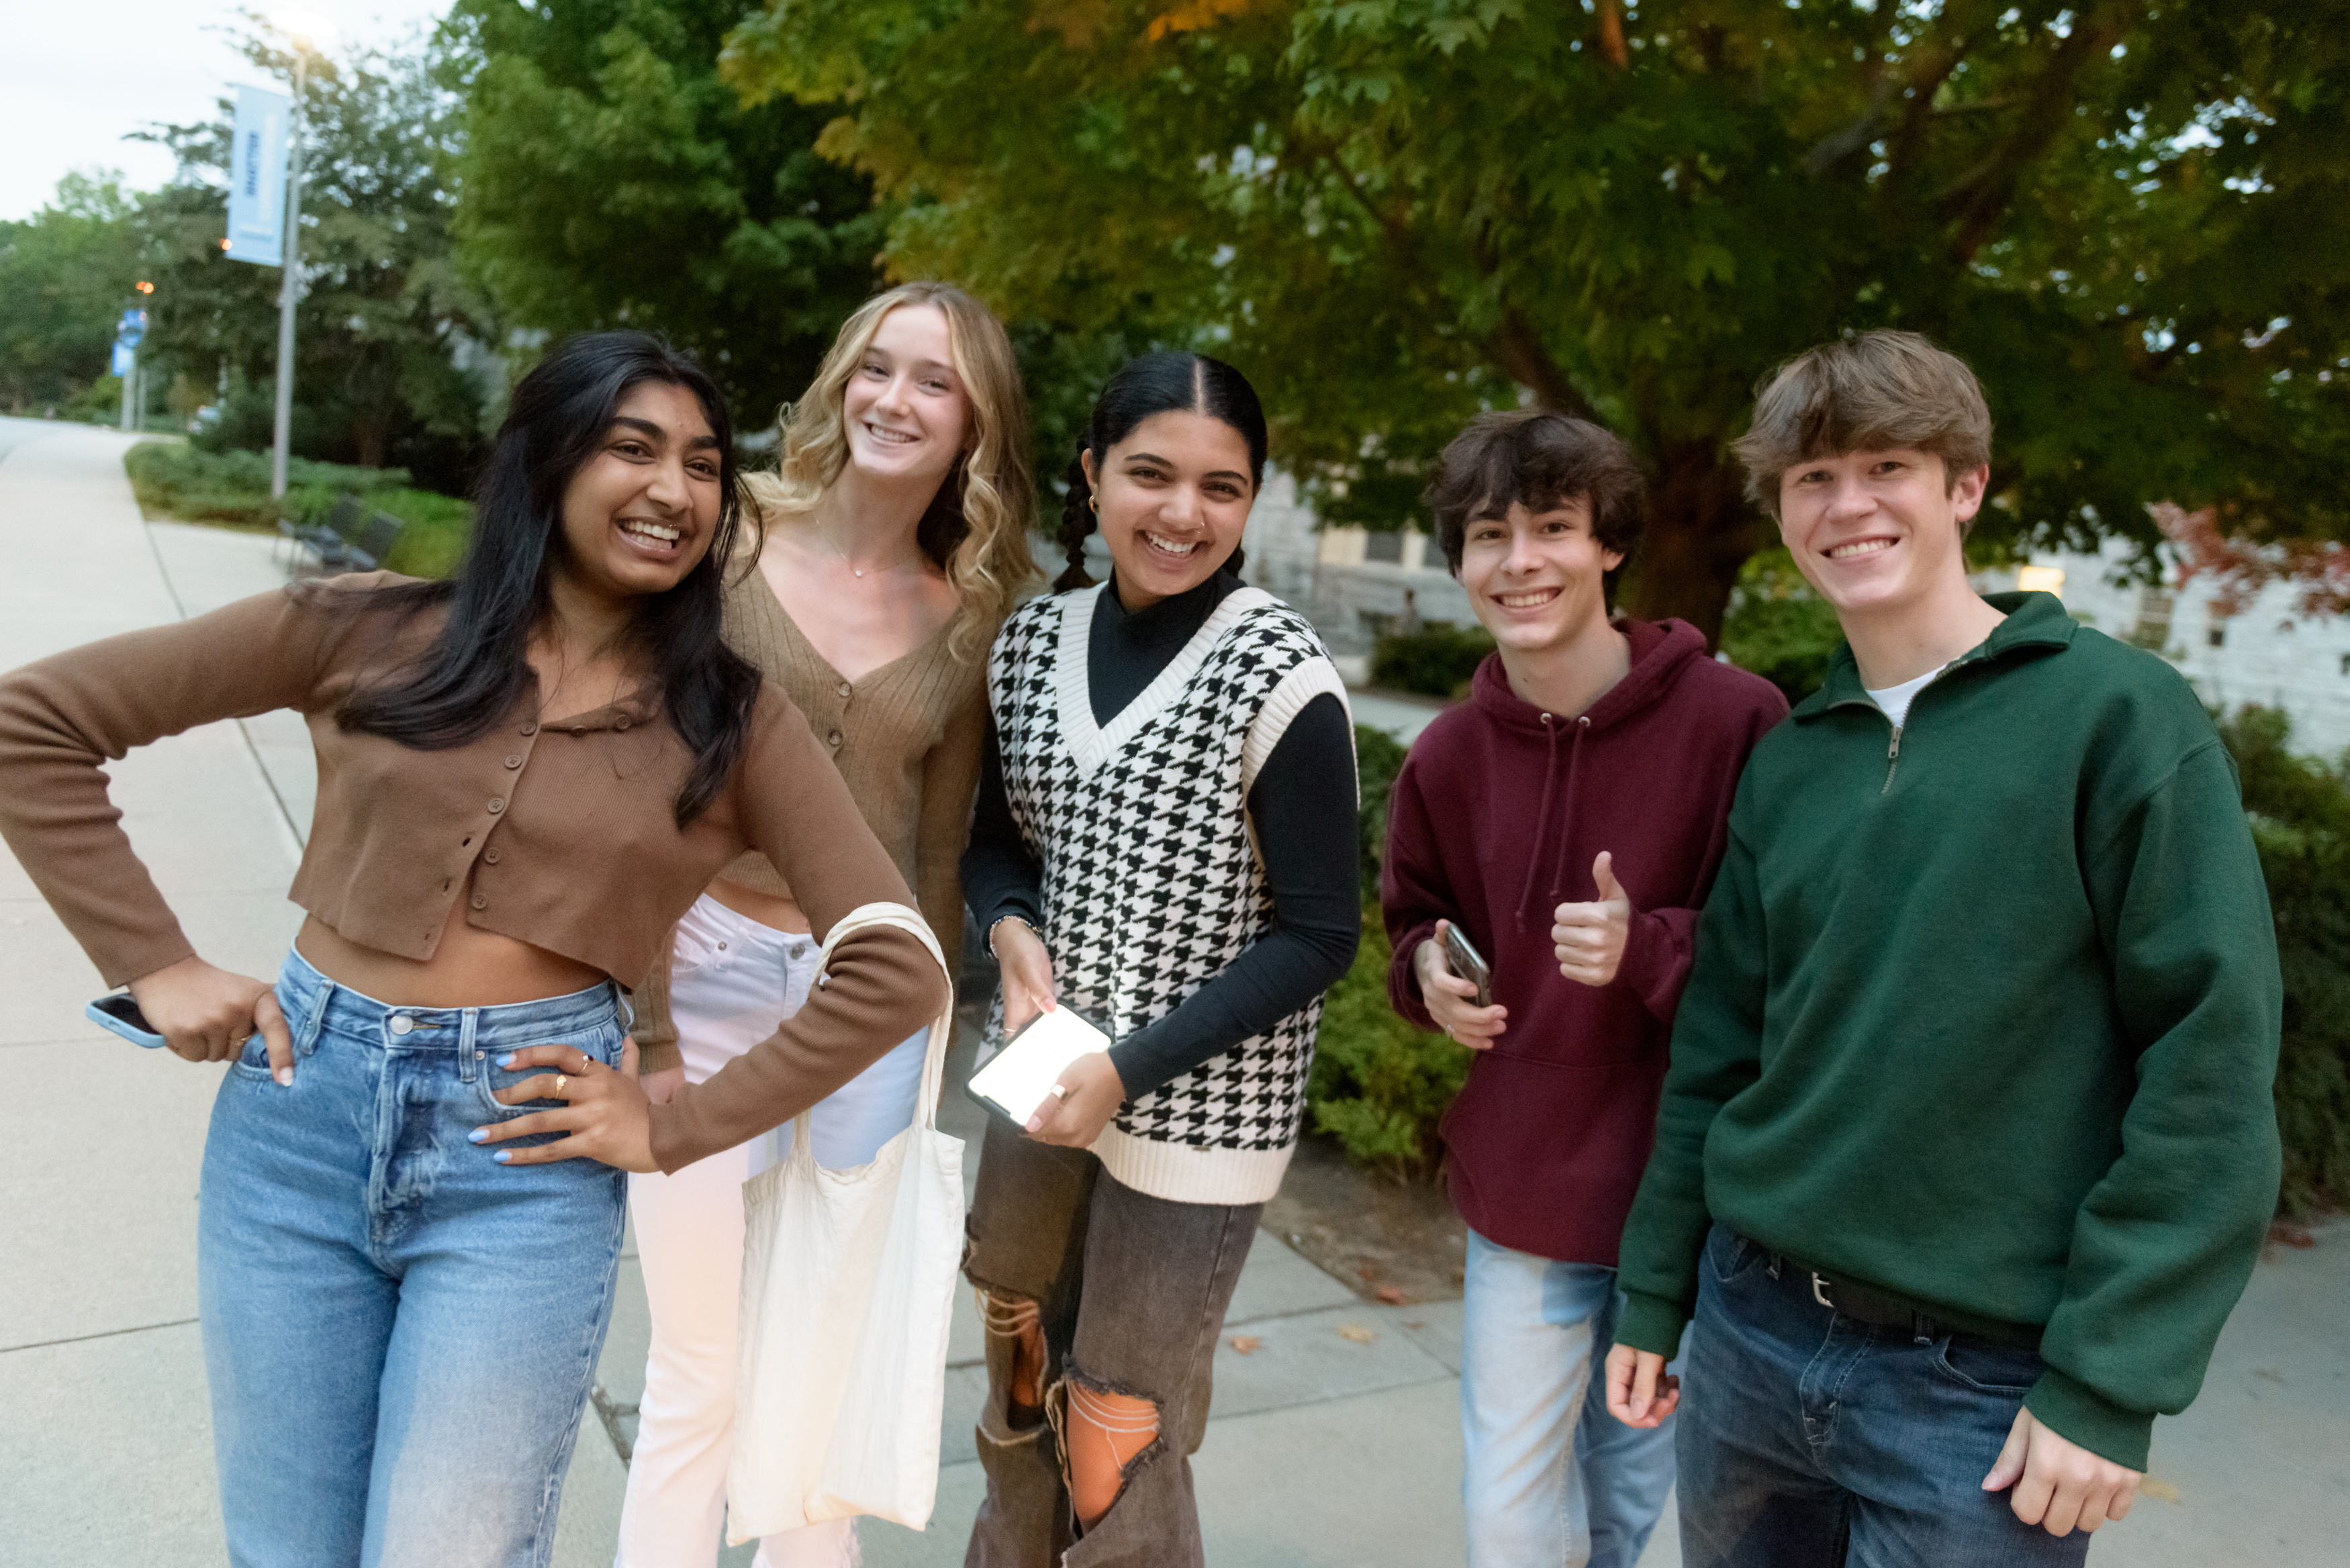 Students smiling and posing